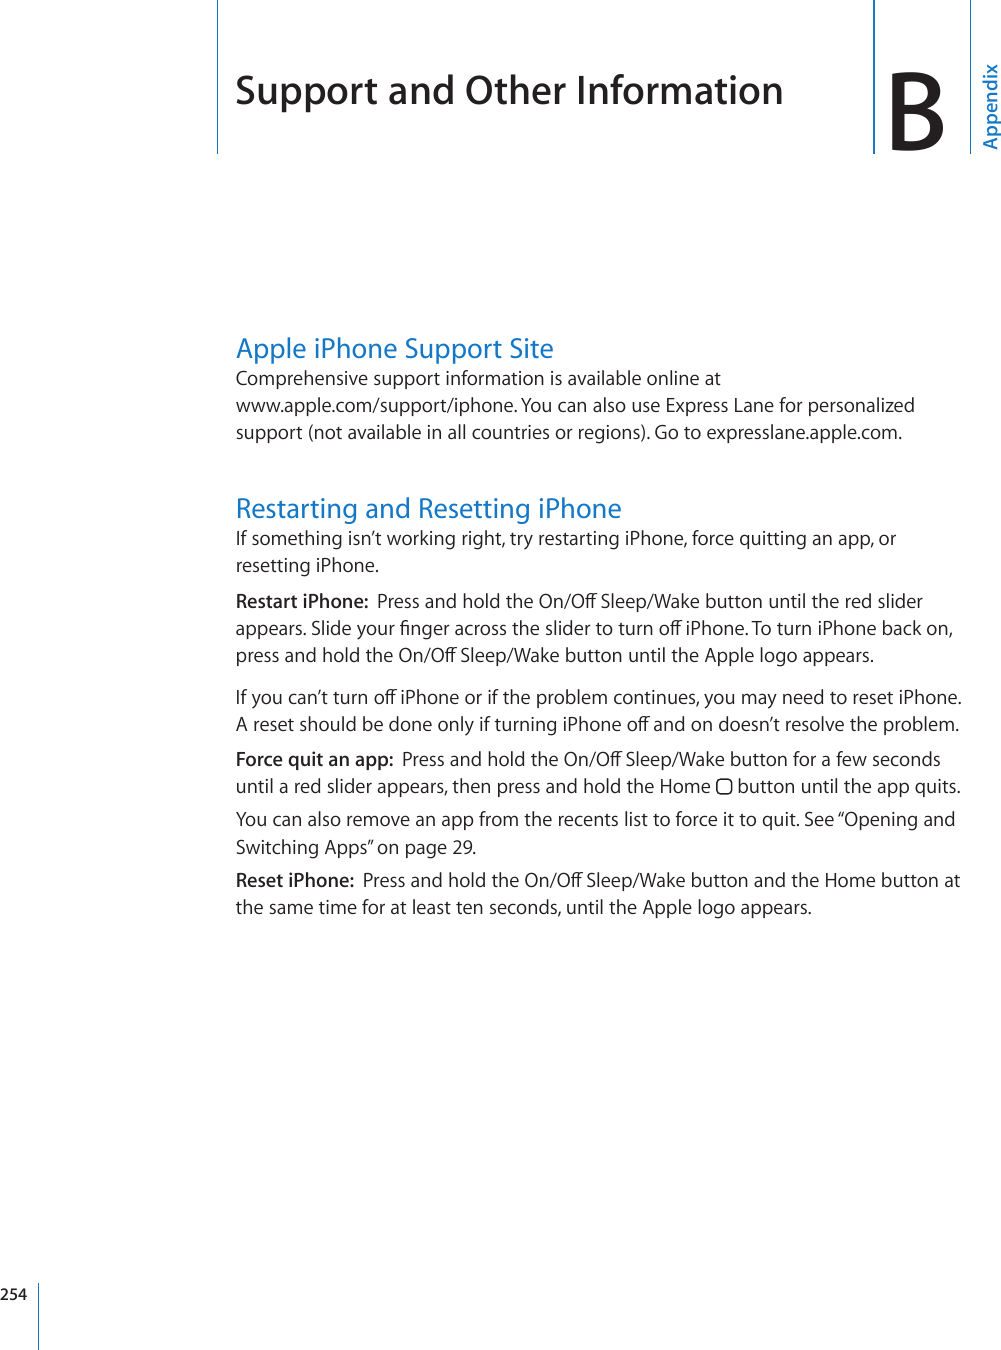 Support and Other Information BAppendixApple iPhone Support SiteComprehensive support information is available online at  www.apple.com/support/iphone. You can also use Express Lane for personalized support (not available in all countries or regions). Go to expresslane.apple.com. Restarting and Resetting iPhoneIf something isn’t working right, try restarting iPhone, force quitting an app, or resetting iPhone.Restart iPhone:  2TGUUCPFJQNFVJG1P1Ò5NGGR9CMGDWVVQPWPVKNVJGTGFUNKFGTCRRGCTU5NKFG[QWT°PIGTCETQUUVJGUNKFGTVQVWTPQÒK2JQPG6QVWTPK2JQPGDCEMQPRTGUUCPFJQNFVJG1P1Ò5NGGR9CMGDWVVQPWPVKNVJG#RRNGNQIQCRRGCTU+H[QWECP¨VVWTPQÒK2JQPGQTKHVJGRTQDNGOEQPVKPWGU[QWOC[PGGFVQTGUGVK2JQPG#TGUGVUJQWNFDGFQPGQPN[KHVWTPKPIK2JQPGQÒCPFQPFQGUP¨VTGUQNXGVJGRTQDNGOForce quit an app:  2TGUUCPFJQNFVJG1P1Ò5NGGR9CMGDWVVQPHQTCHGYUGEQPFUuntil a red slider appears, then press and hold the Home   button until the app quits.You can also remove an app from the recents list to force it to quit. See “Opening and Switching Apps” on page 29.Reset iPhone:  2TGUUCPFJQNFVJG1P1Ò5NGGR9CMGDWVVQPCPFVJG*QOGDWVVQPCVthe same time for at least ten seconds, until the Apple logo appears.254